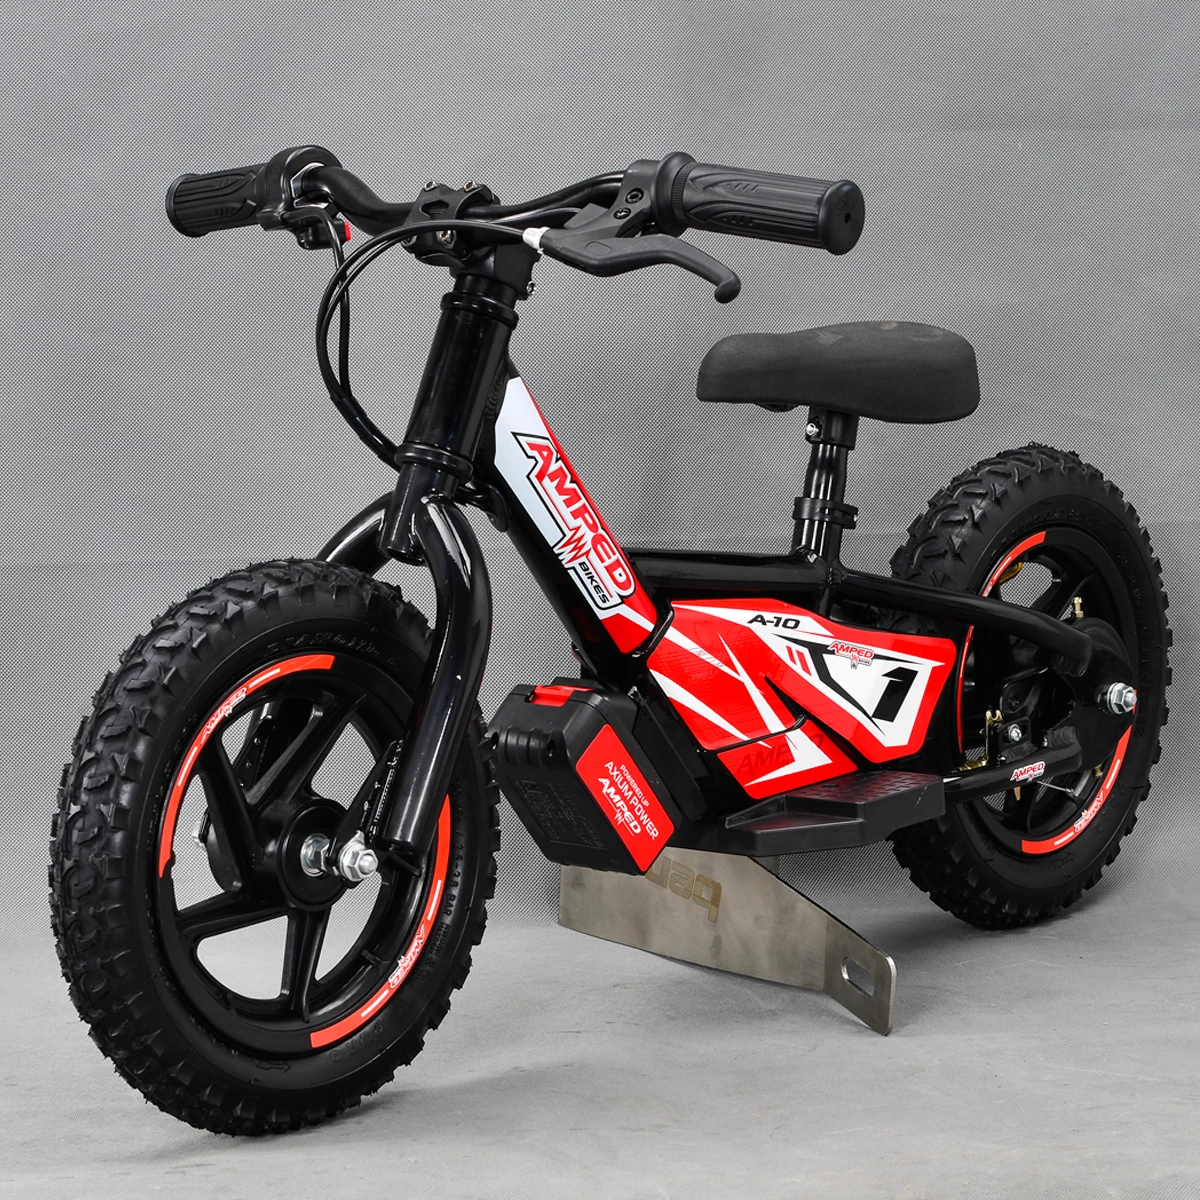 electric bike for 3 year old